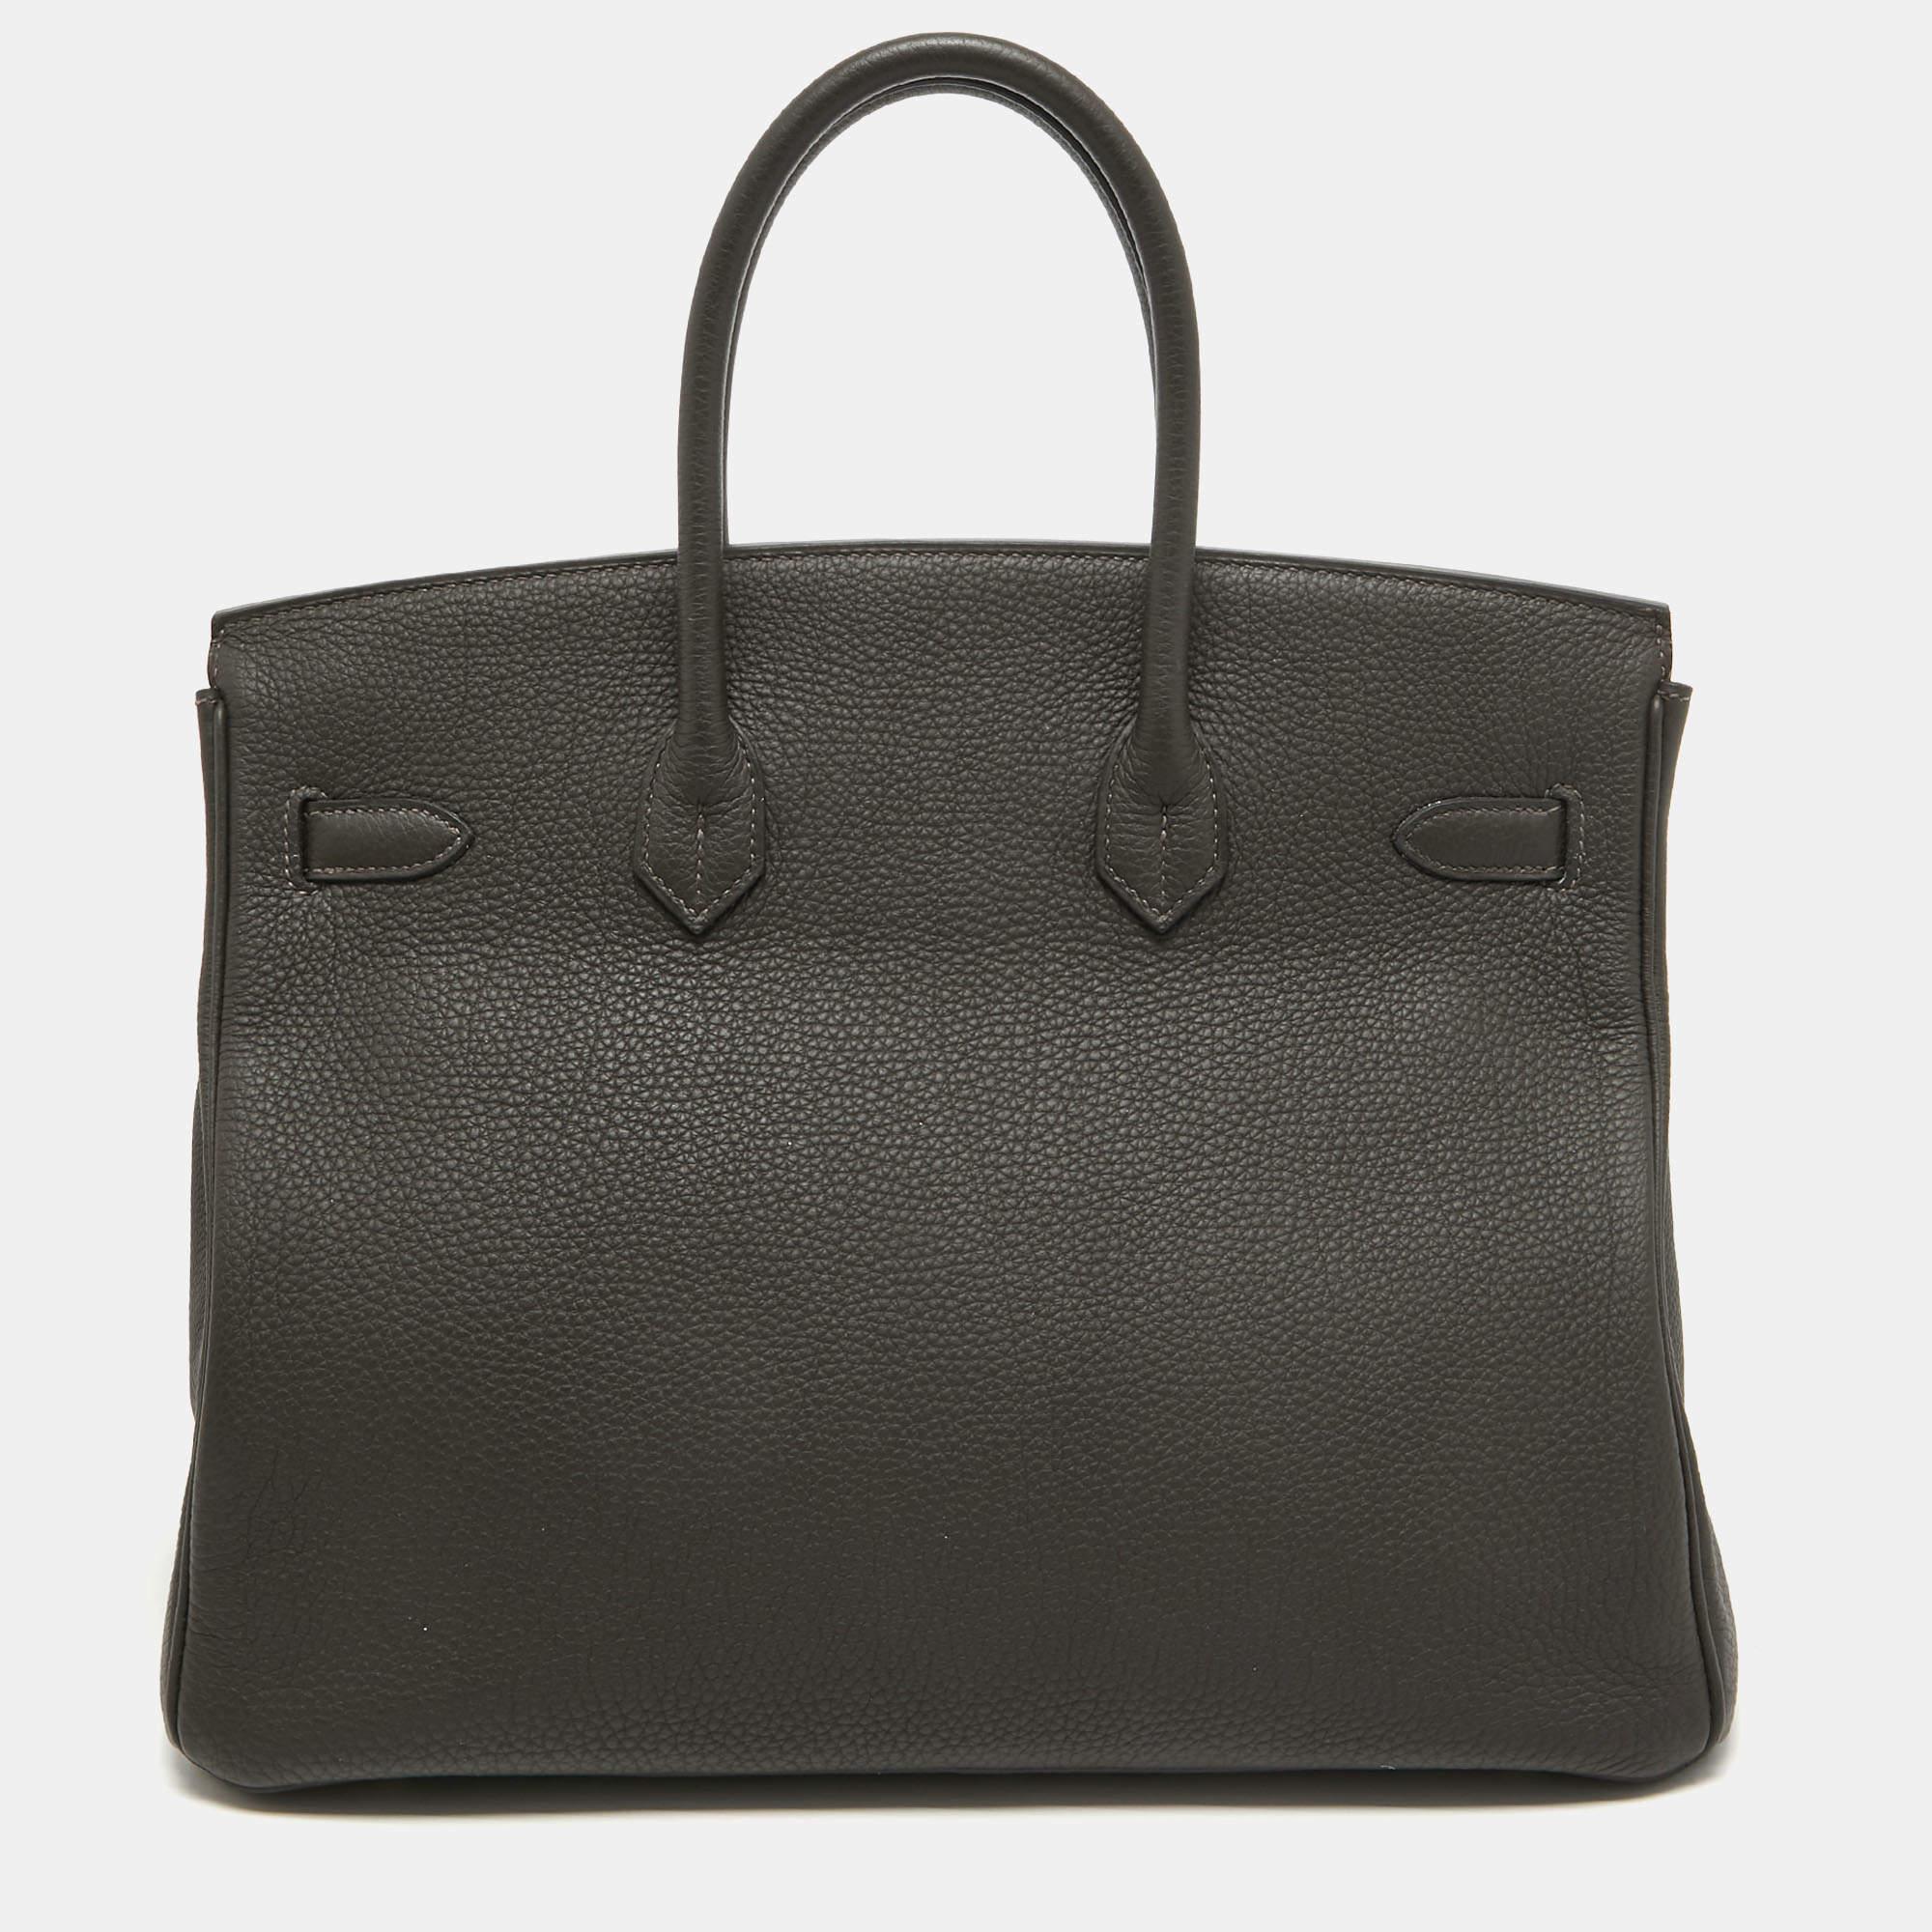 The Hermès Birkin is rightly one of the most desired handbags in the world. Handcrafted from the highest quality of leather by skilled artisans, it takes long hours of rigorous effort to stitch a Birkin together. Crafted with expertise, the bag